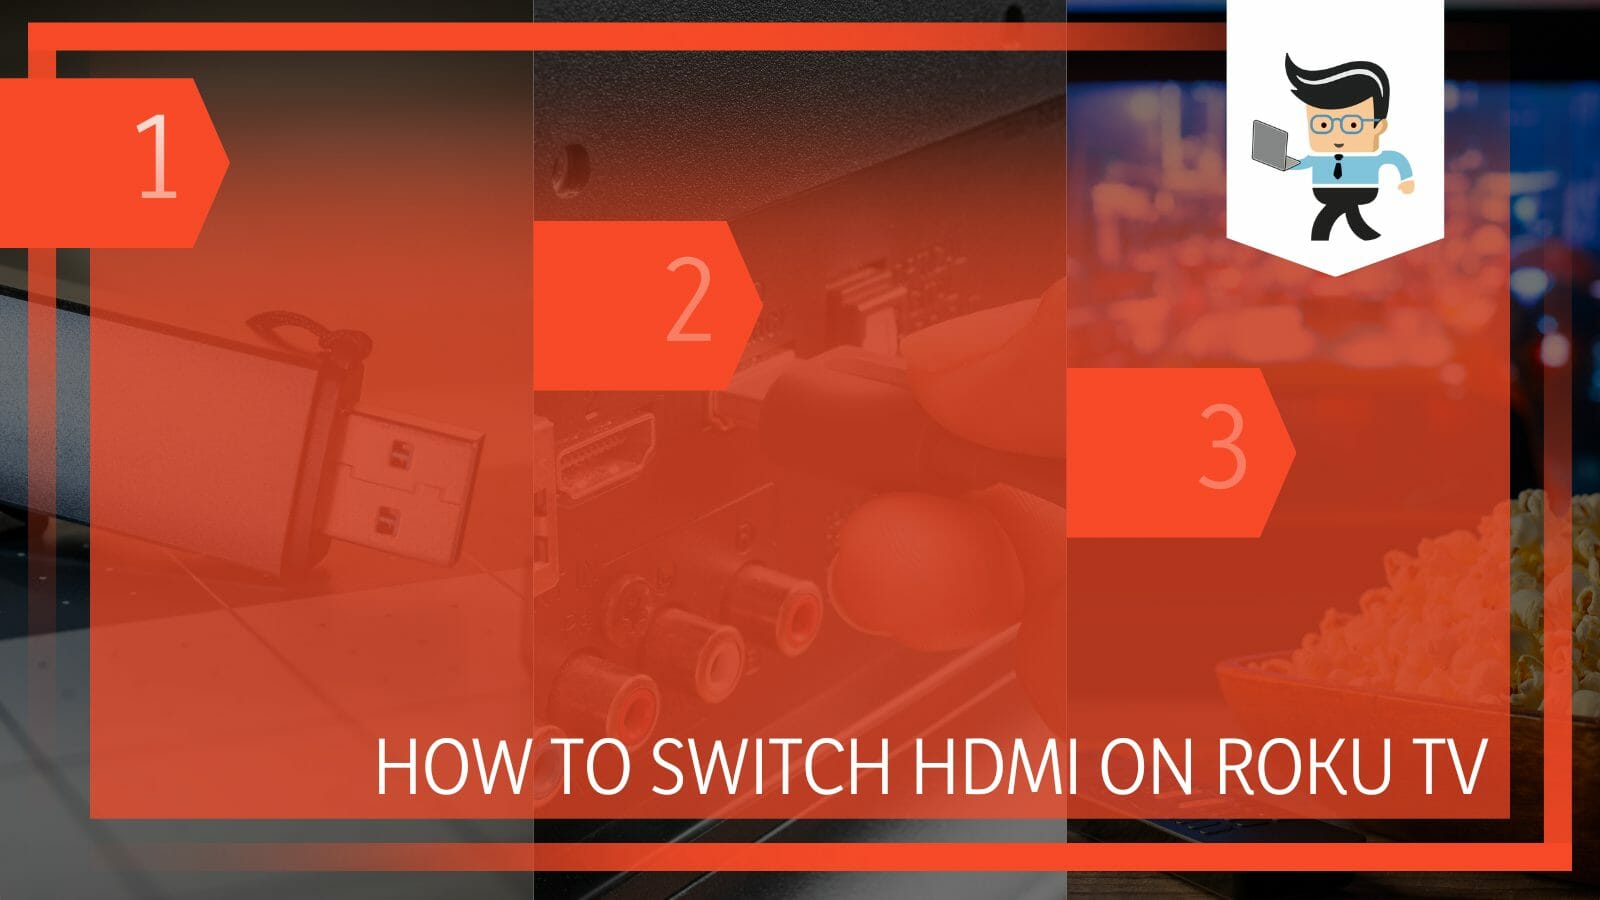 How to Switch HDMI on Roku TV